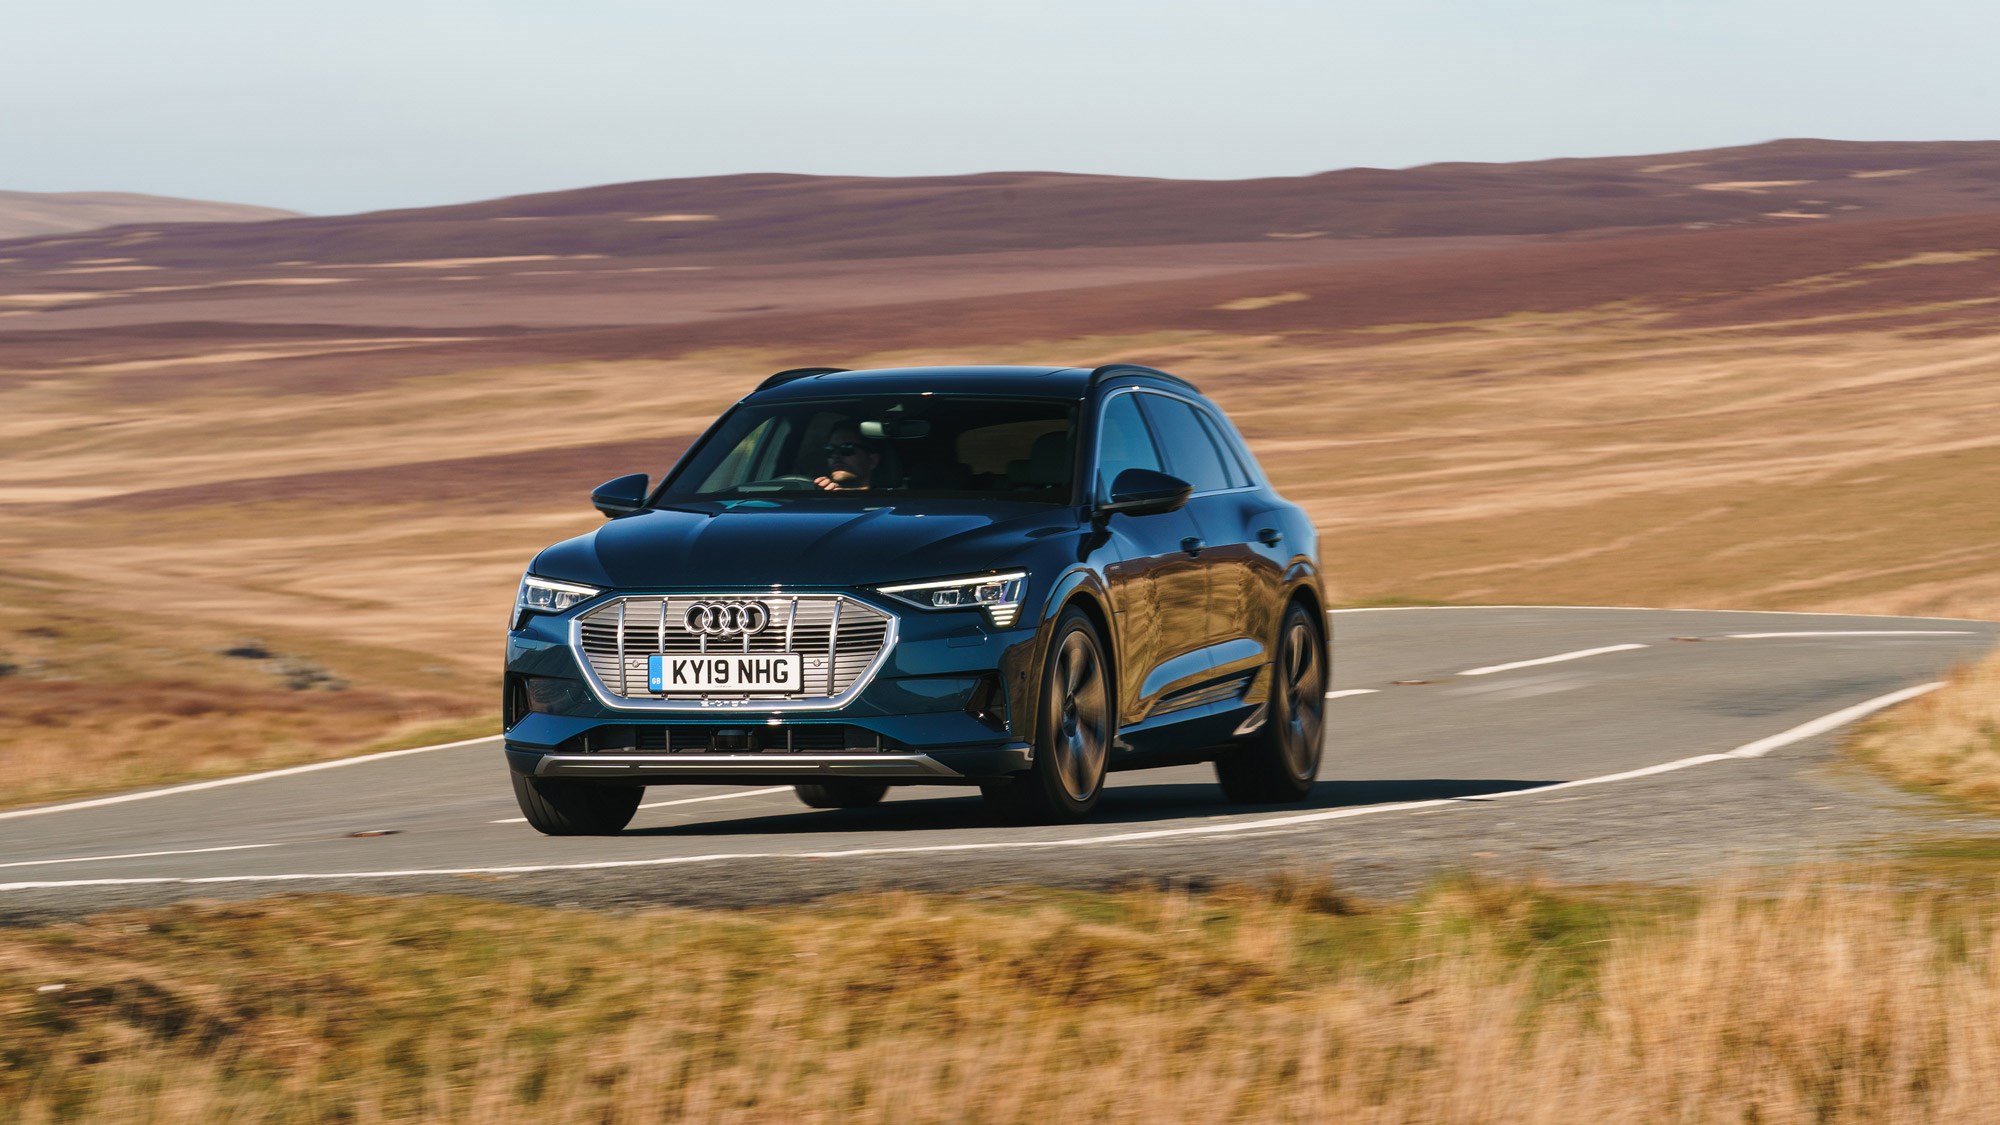 Here it is, the most important Audi in decades; the all-electric e-Tron SUV. The first step of a ascendance from nitrogen dioxide sinner to aspiring zero-emission saint, the handsome-looking EV is just the beginning for Ingolstadt’s electric plans. After this, there’ll be a flurry of EVs from the four rings, with a Sportback and a J1-based e-Tron GT Coupe following soon after.   Available to order now with the first UK deliveries only just rolling out of the factory, the new 2019 Audi e-Tron has a certified 241-mile electric range, and promises trademark Audi performance, four-wheel drive, the usual quality interior – and cleaner guts.   We were there when the e-Tron was first revealed in San Francisco, and we’ve driven it on the worldwide launch, too. It can tick all the boxes in Dubai – but can the e-Tron do it on a cold day in North Yorkshire? Keep reading for our full UK review.   ***What's the UK-spec Audi e-Tron like inside?   Slip into the e-Tron, and it fits Audi’s tagline for the car perfectly. ‘EV goes Audi’ is the ethos inside and out, and that means the e-Tron’s cabin could be in any Q car.   The touchscreen-heavy cabin invites you to swipe and pinch just like the A8 – and even the steering wheel isn’t particularly EV-alike. The cruise control switches are lifted straight from the TTS we’ve driven here, and there are paddles, too – which we’ll get to later.  In fact, it’s the only the transmission where the e-Tron dares to be different – and that’s because it doesn’t have one. Instead, the area between the passenger and driver is full of storage space with cubby holes, cup-holders and a wireless phone charger all packed into a rather bulky, plastic frame. We’d rather the empty space.   Still the e-Tron does differentiate itself with an unusual thumb-flicking drive selector. Mounted under a hand rest, it’s pleasingly tactile - and is clicked forward and back by your thumb and index finger. It’s a small thing, but it’s something you’ll notice every time you drive.   ****Well. how does the e-Tron actually drive, then?   Click into Drive, gingerly apply the throttle – this car won’t creep forward like a Tesla – and the firmness of the pedal is the first big surprise. The e-Tron is a 2.5-tonne SUV, with a right pedal more McLaren-like than you’d think. It quietly makes you less blunt with your inputs, and in S mode, it gives the car a sportier feel, too. It’s a win-win.   Flex the power of the e-Tron with your foot to the floor, and it accelerates in a progressive, but ultimately physics-bending way, and eerie silence is quickly overtaken by wind and road noise.   ****What’s it like to drive in the UK?   That instant torque makes entering  roundabouts easier, allowing you to more safely dart into gaps, and it makes overtaking a simple, effortless experience, too. Passing another car is as simple as checking the oncoming traffic, easing on the power and slotting in front. No hesitant kickdowns, no noise –  just a whoosh. Seamless.   As for the ride? Even on North Yorkshire’s roughest roads, the e-Tron delivers a composed, and planted ride comfort regardless of the setting you’re on. Flick into Comfort using the very familiar Drive Select button, and you’ll find the throttle response rounded off, lighter steering and the bumps smoothed out.   Move over to Sport; power response is instant, the wheel weights up and you feel those nooks and crannies in the surface of the tarmac a little more. Body roll, while minimal in Comfort, is further reduced in Sport, and makes you want to push the 2.5-tonne SUV just a bit harder.  Braking uses both discs and energy-saving regen, seamlessly switching between the two depending on your application. It works very well, with little jolting or juddering as the system switches between the two.  On motorways, you’ll find the e-Tron like any other car – except for its effortless ability to overtake. Wind noise and tyre noise are even more apparent without the hum of combustion, though, and you’ll notice whistling around around the wing mirrors and A-pillars.  We were driving a conventionally mirrored model; it’ll be interesting to see if the lower-dragged, electric-cameras have a big impact on wind noise. And some more on the e-Trons webcams. They’re actually legal in the UK, and they’re able to slightly enhance the image they receive, so you actually see more with them in low-light conditions.    They’re standard with the £82,270 Launch edition e-Tron - not the entry-level £71,520 car. If you want them on anything other than launch-spec, the cameras will set you back £1250.   And what about those paddles? Look around the cabin, and you won’t find a B-mode for increased regen; instead, Audi’s mapped that function to paddles behind the wheel. Tap the + paddle to increase resistance and energy recovery, and pull the – paddle for less. In some ways, it makes sense to have it behind the wheel;  it’s a form of engine braking or ‘gear’ use – but it’ll take  time to learn and use it intelligently.   ****Newton still wins  Of course, the new Audi e-Tron isn’t a sports car, and when you’re doing anything other than accelerating in a straight line , it can’t really repeal the laws of physics. Body roll isn’t a large factor, but, the height and the weight of the car is more apparent on corner entry. It’s very much the same experience you get in something like a Tesla Model X; it’s a supercar when going straight ahead, but you’re acutely aware of every kg of its weight when you’re doing anything else.   ****UK verdict?   In many ways, the e-Tron is just like any other Audi, inside and out - but that’s what makes it exciting. It’s an SUV you can imagine slotting easily into your everyday life, with more charging options, and packages easing you over the ever-shrinking hurdles of EV ownership. 